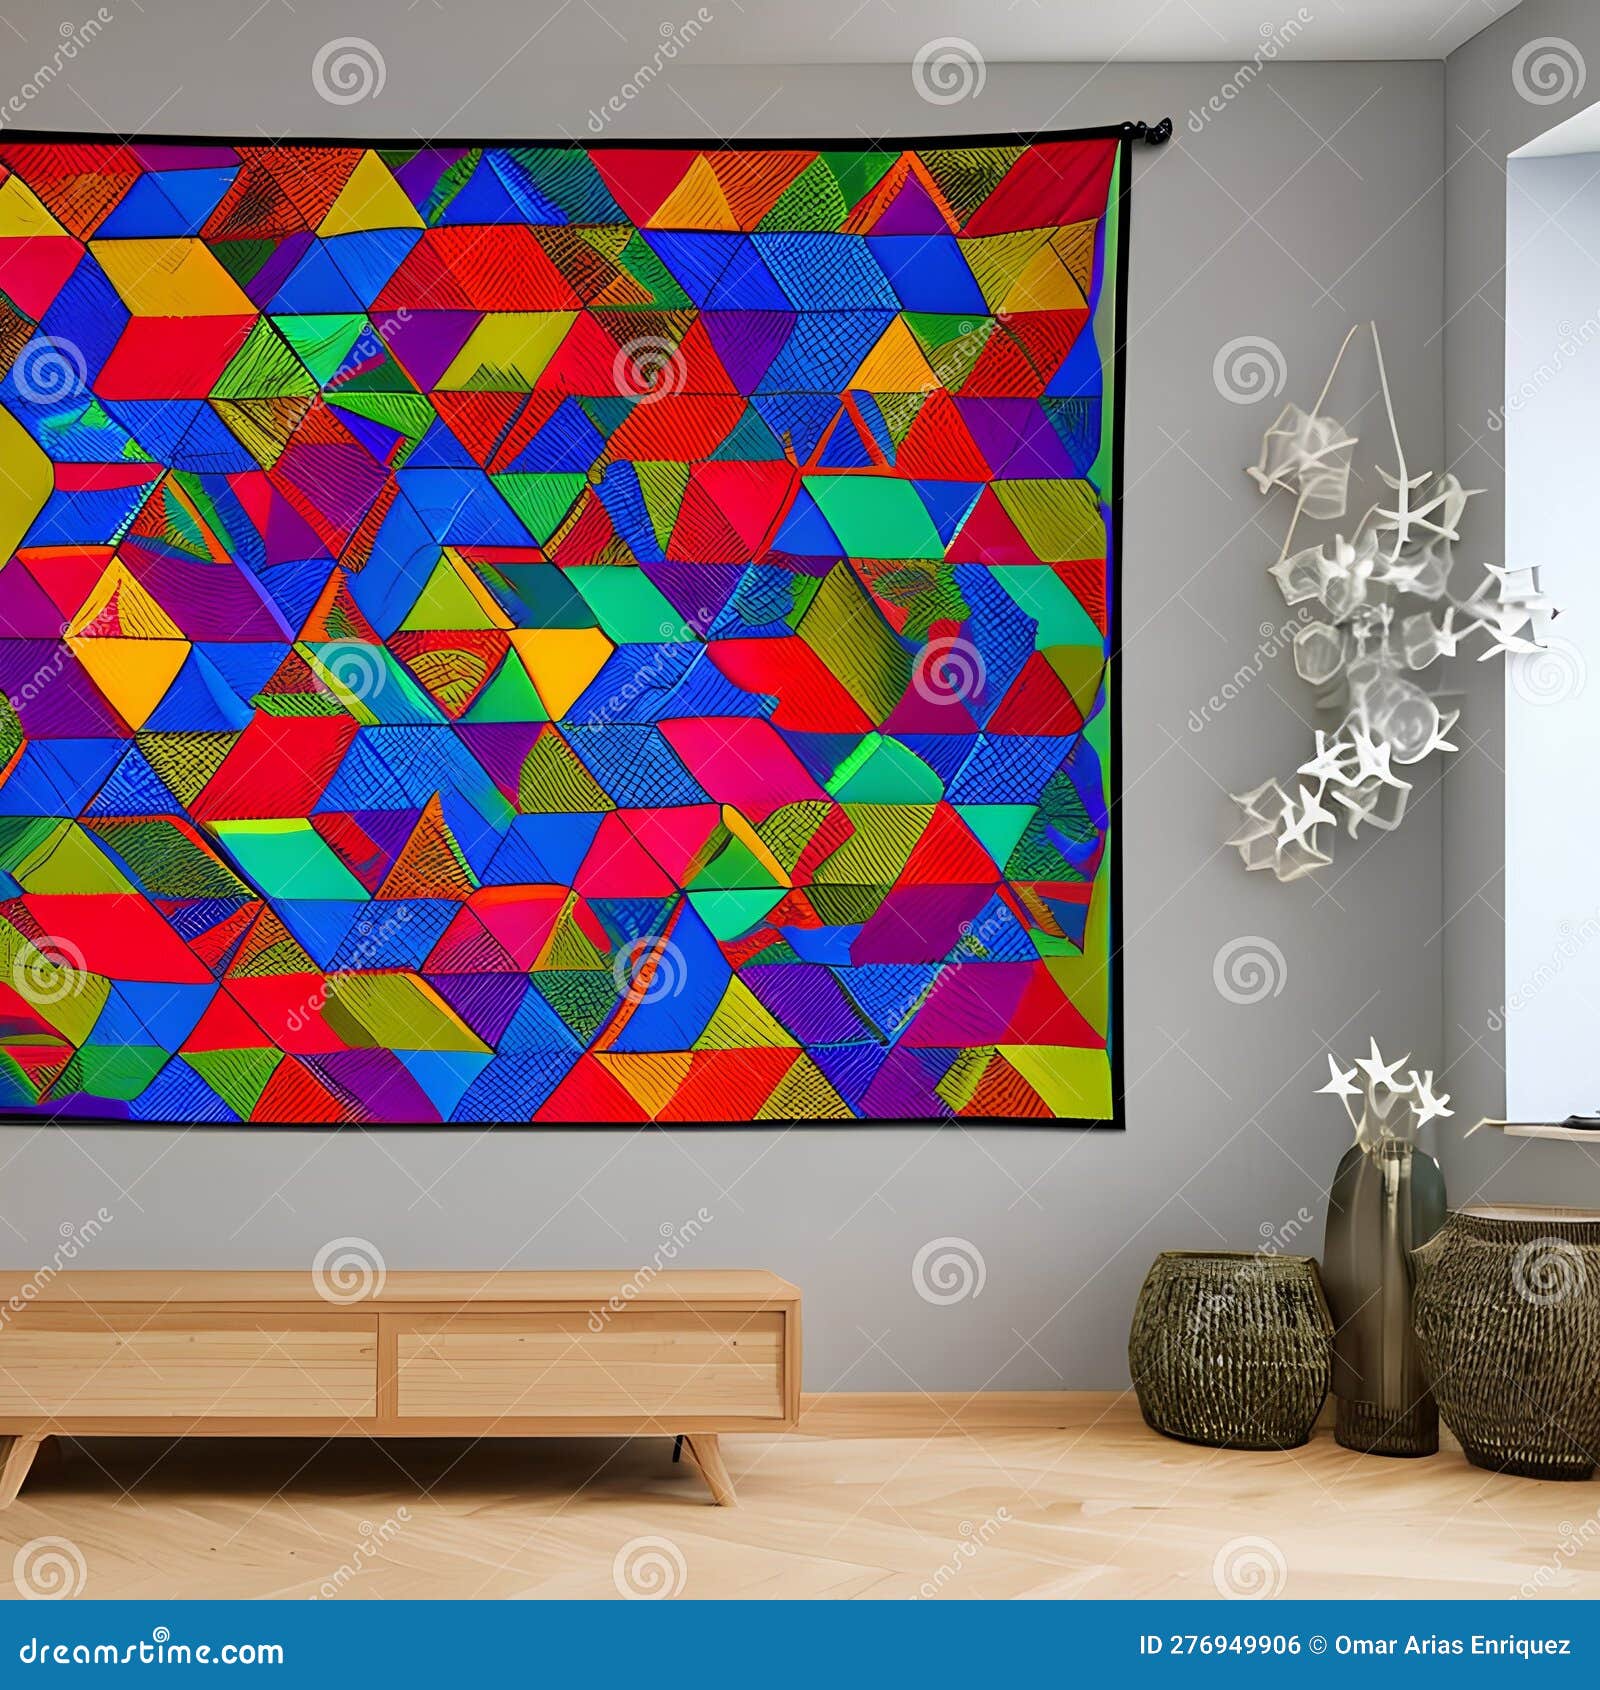 tetrahedral tapestry: an image of a geometric pattern created with tetrahedra, in a mix of vibrant colors and intricate s1